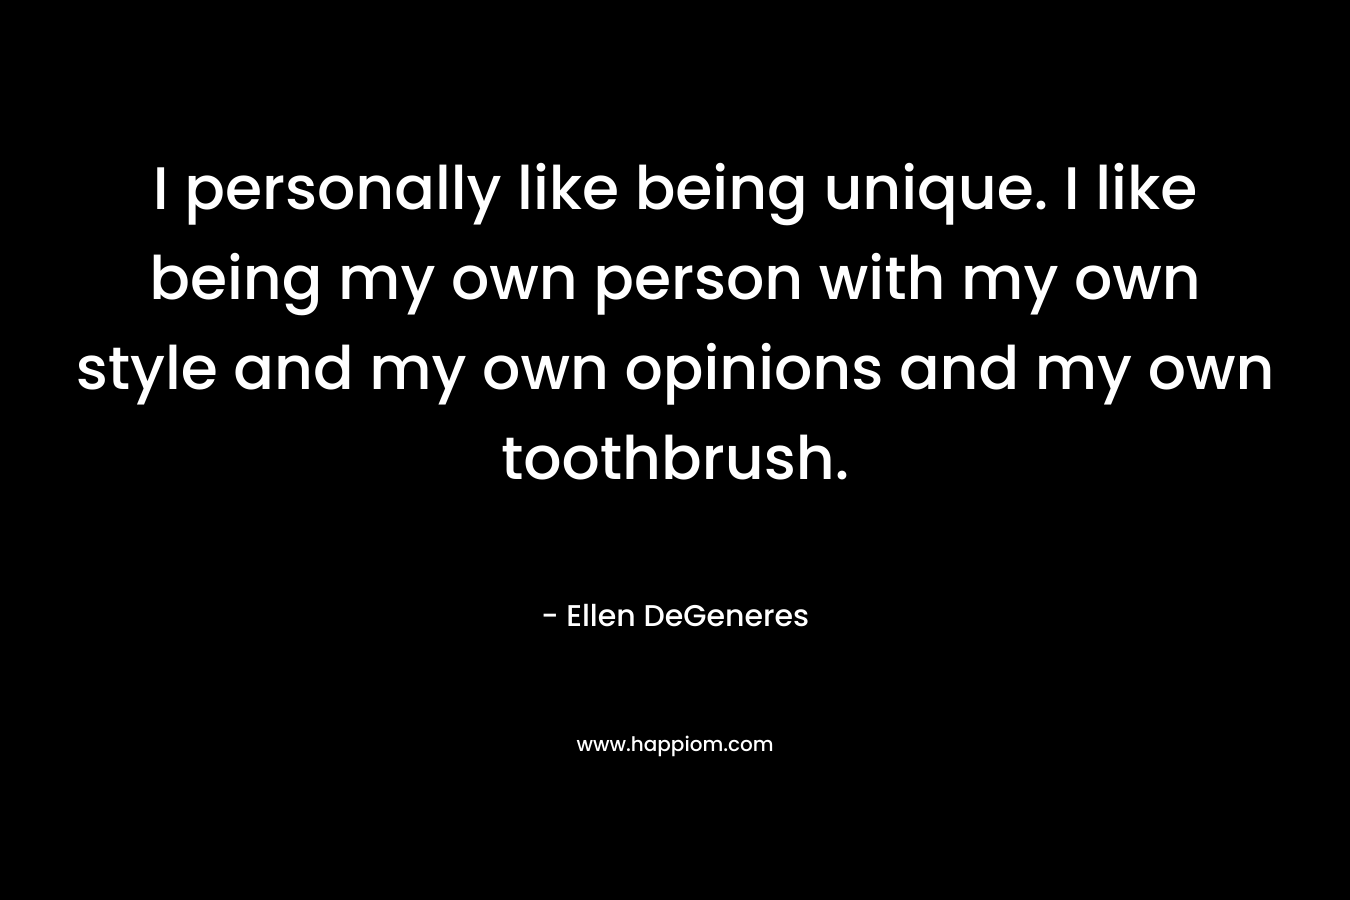 I personally like being unique. I like being my own person with my own style and my own opinions and my own toothbrush.